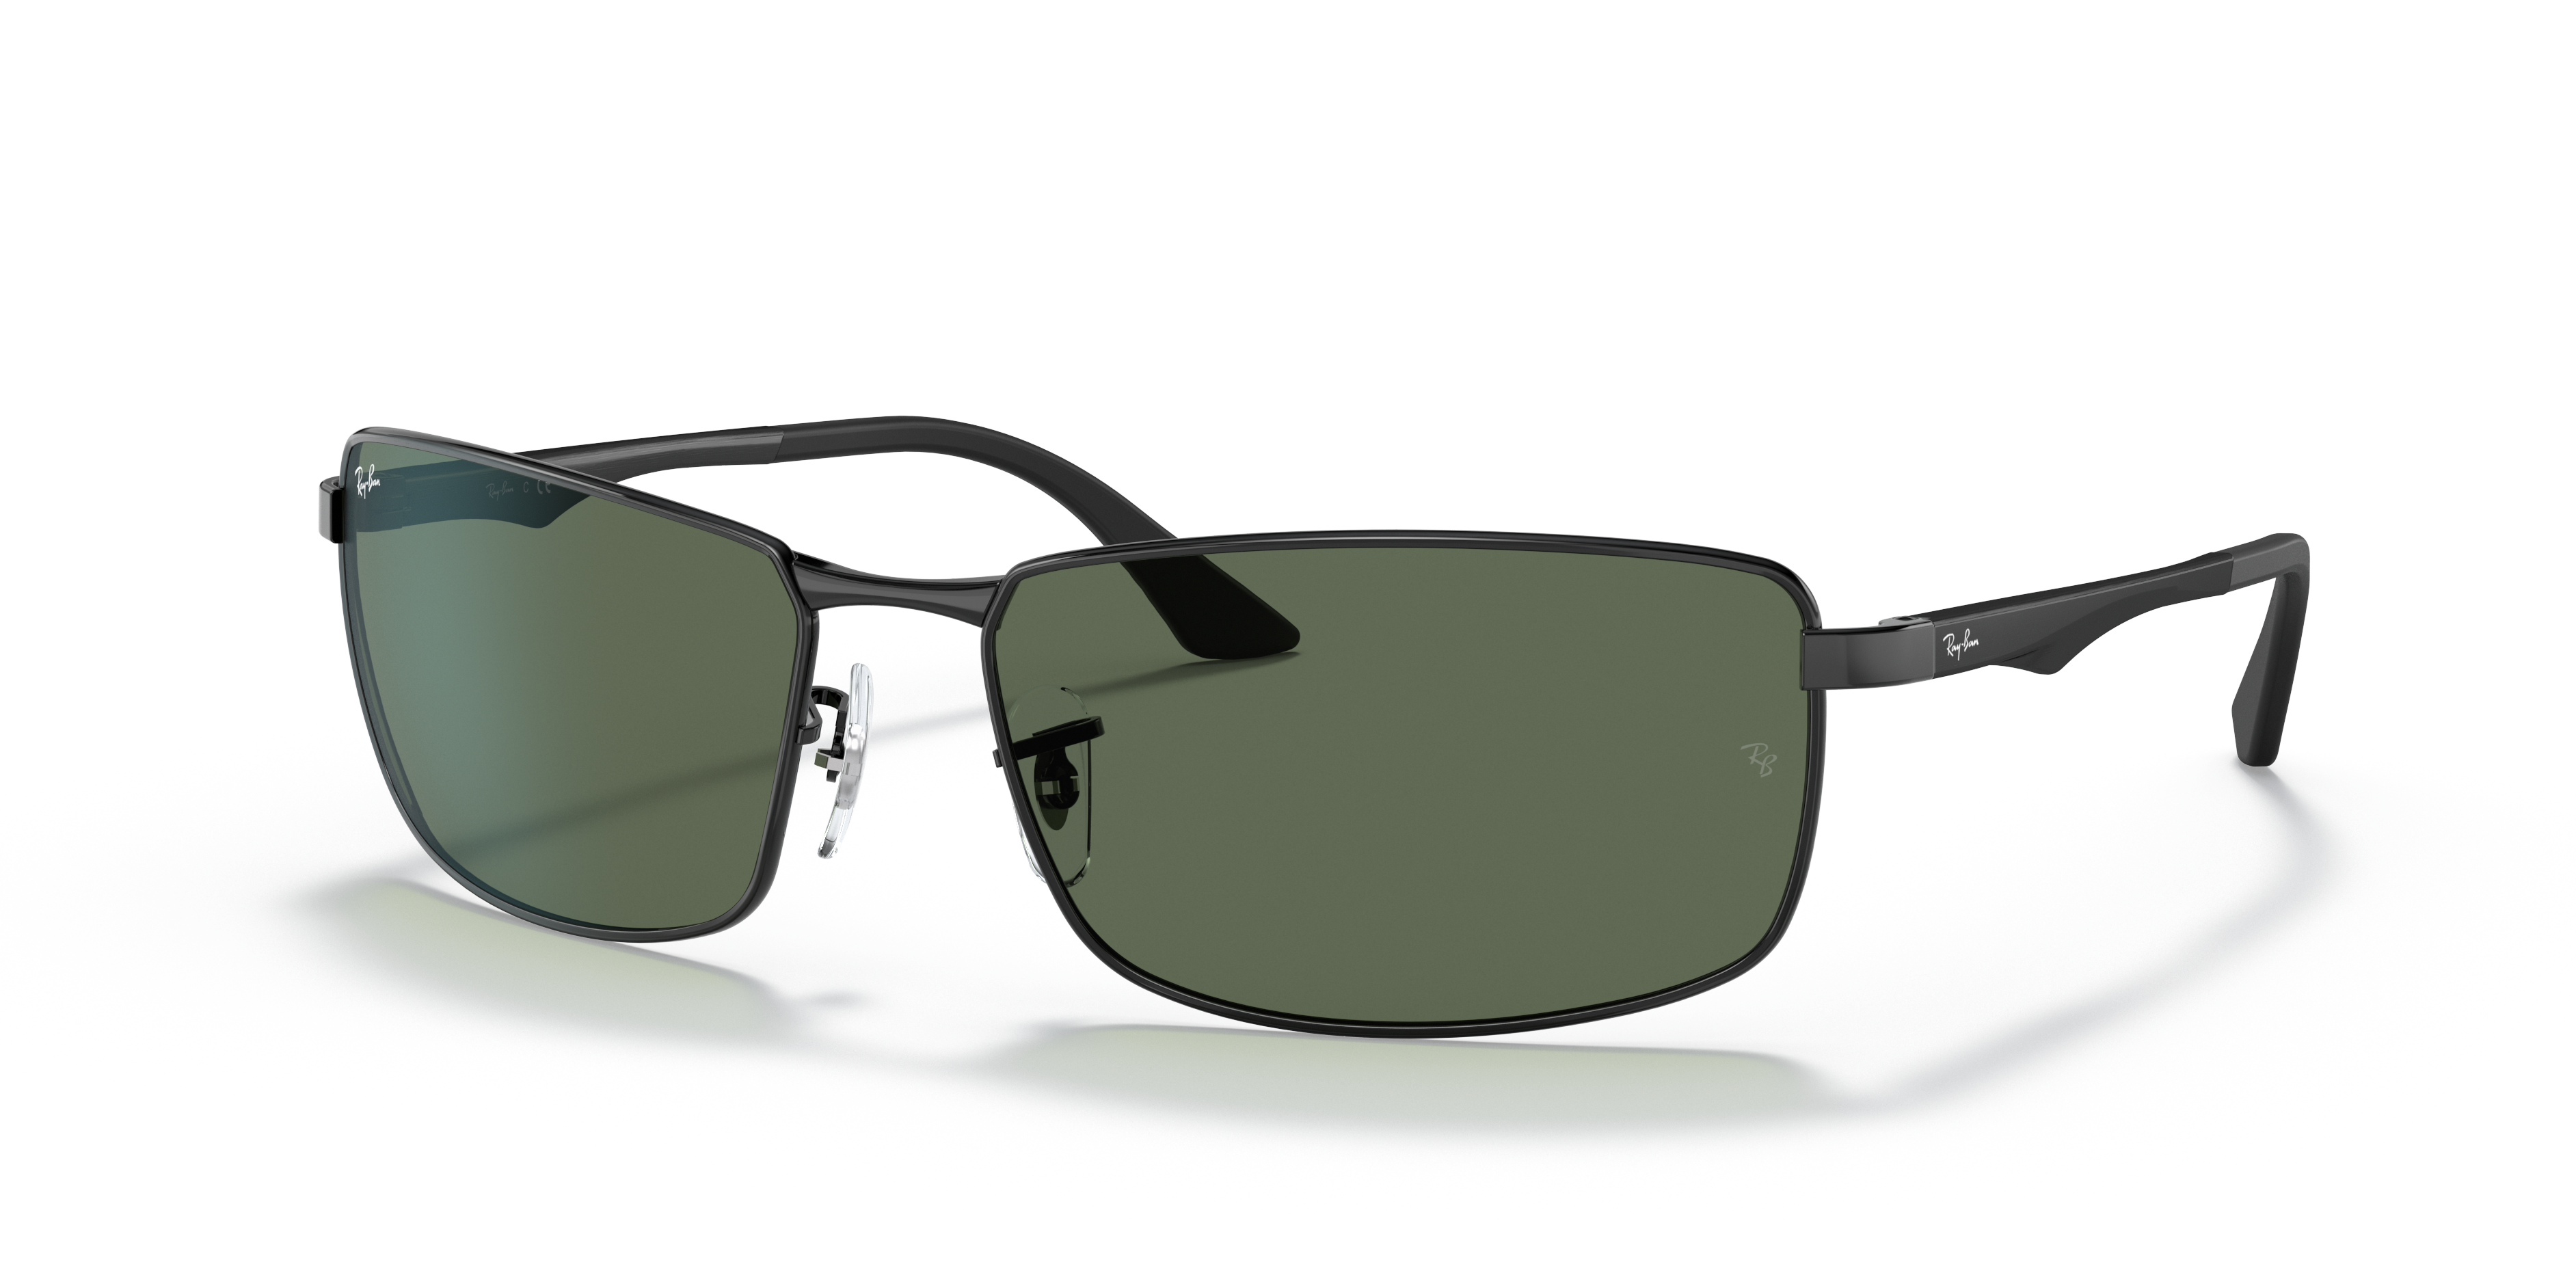 N/a Sunglasses in Black and Green | Ray-Ban®